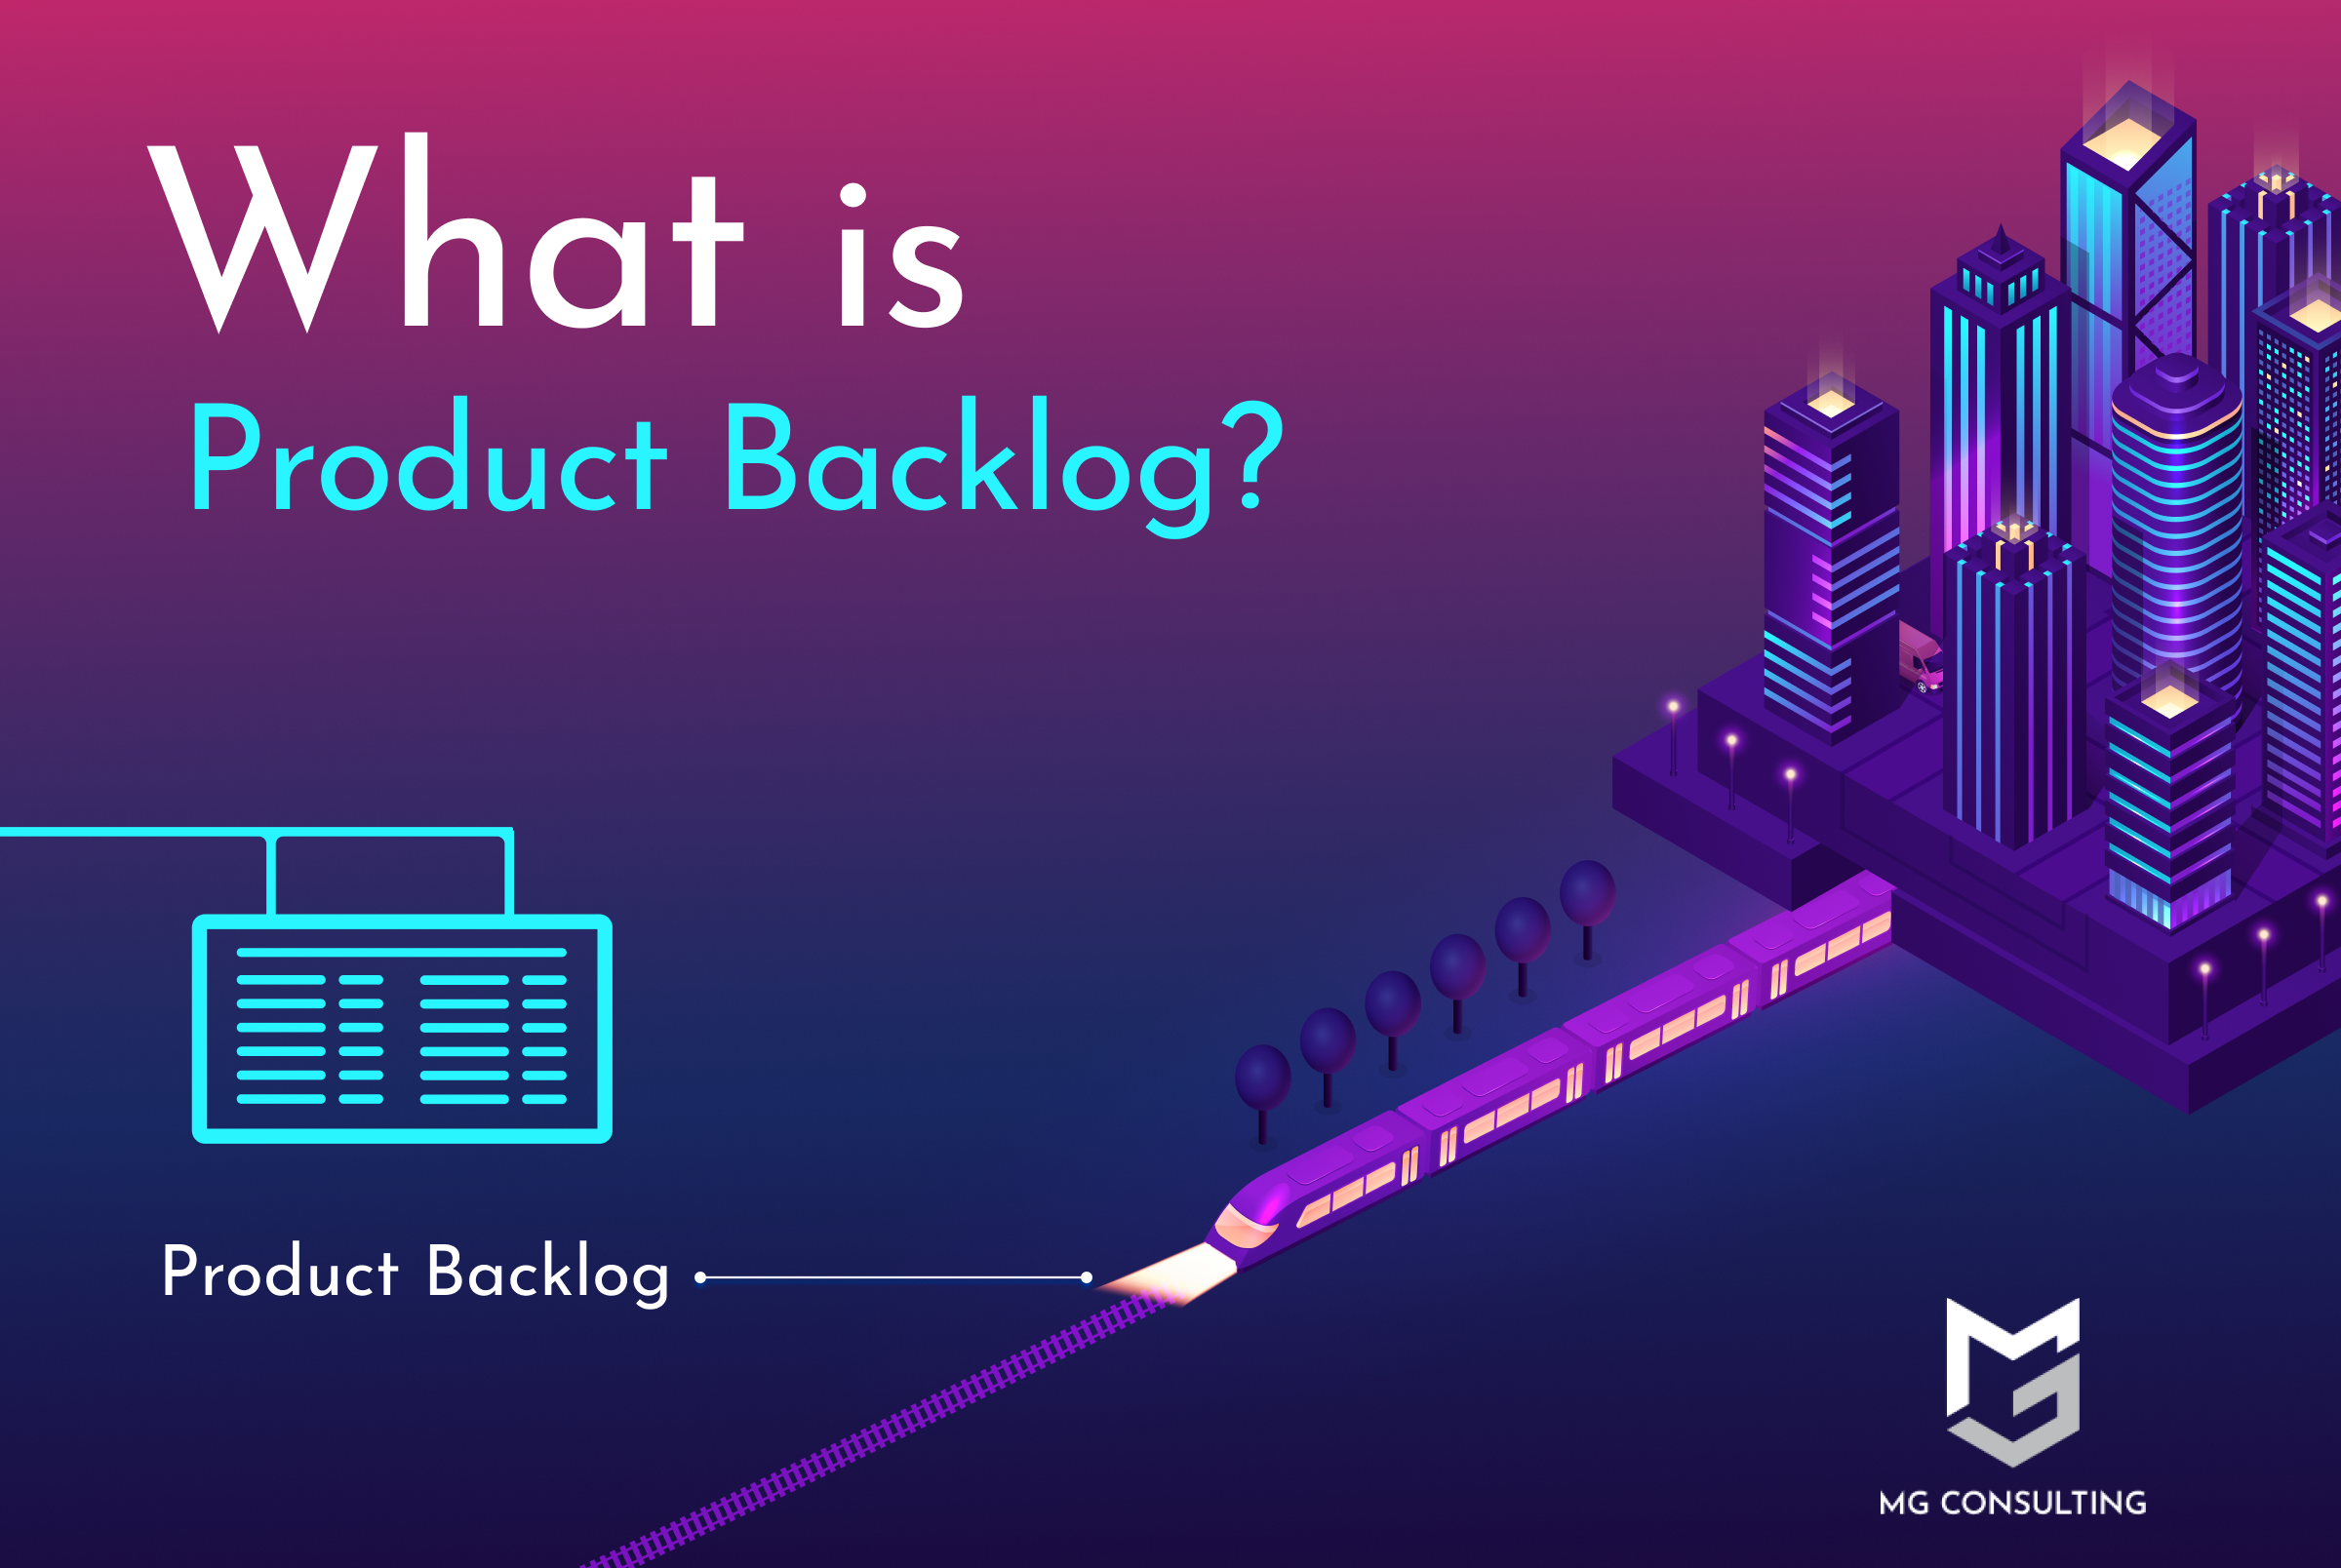 What is Product Backlog